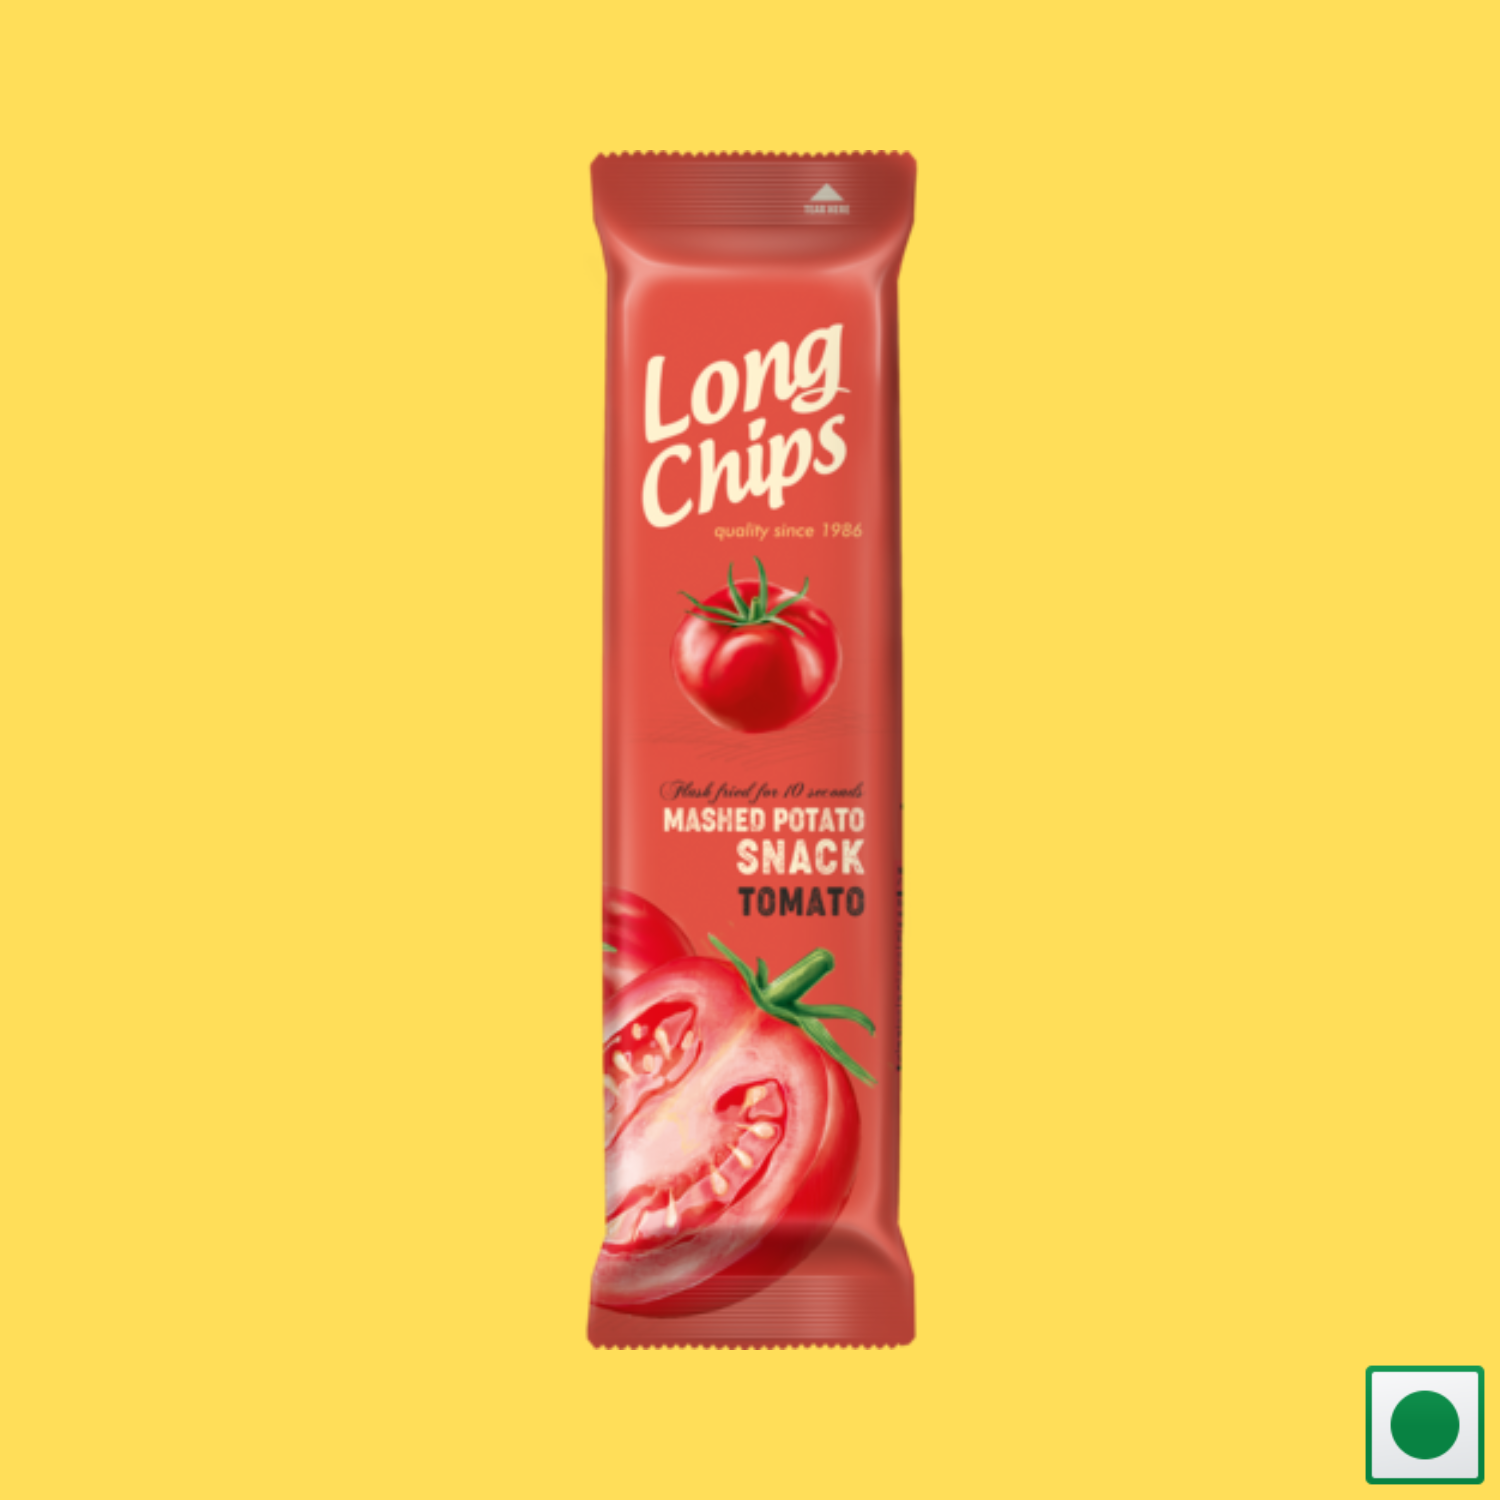 Long Chips Mashed Potato Snack Tomato Flavoured, 75g (Imported) {Buy 2 Get 1 Free!!}